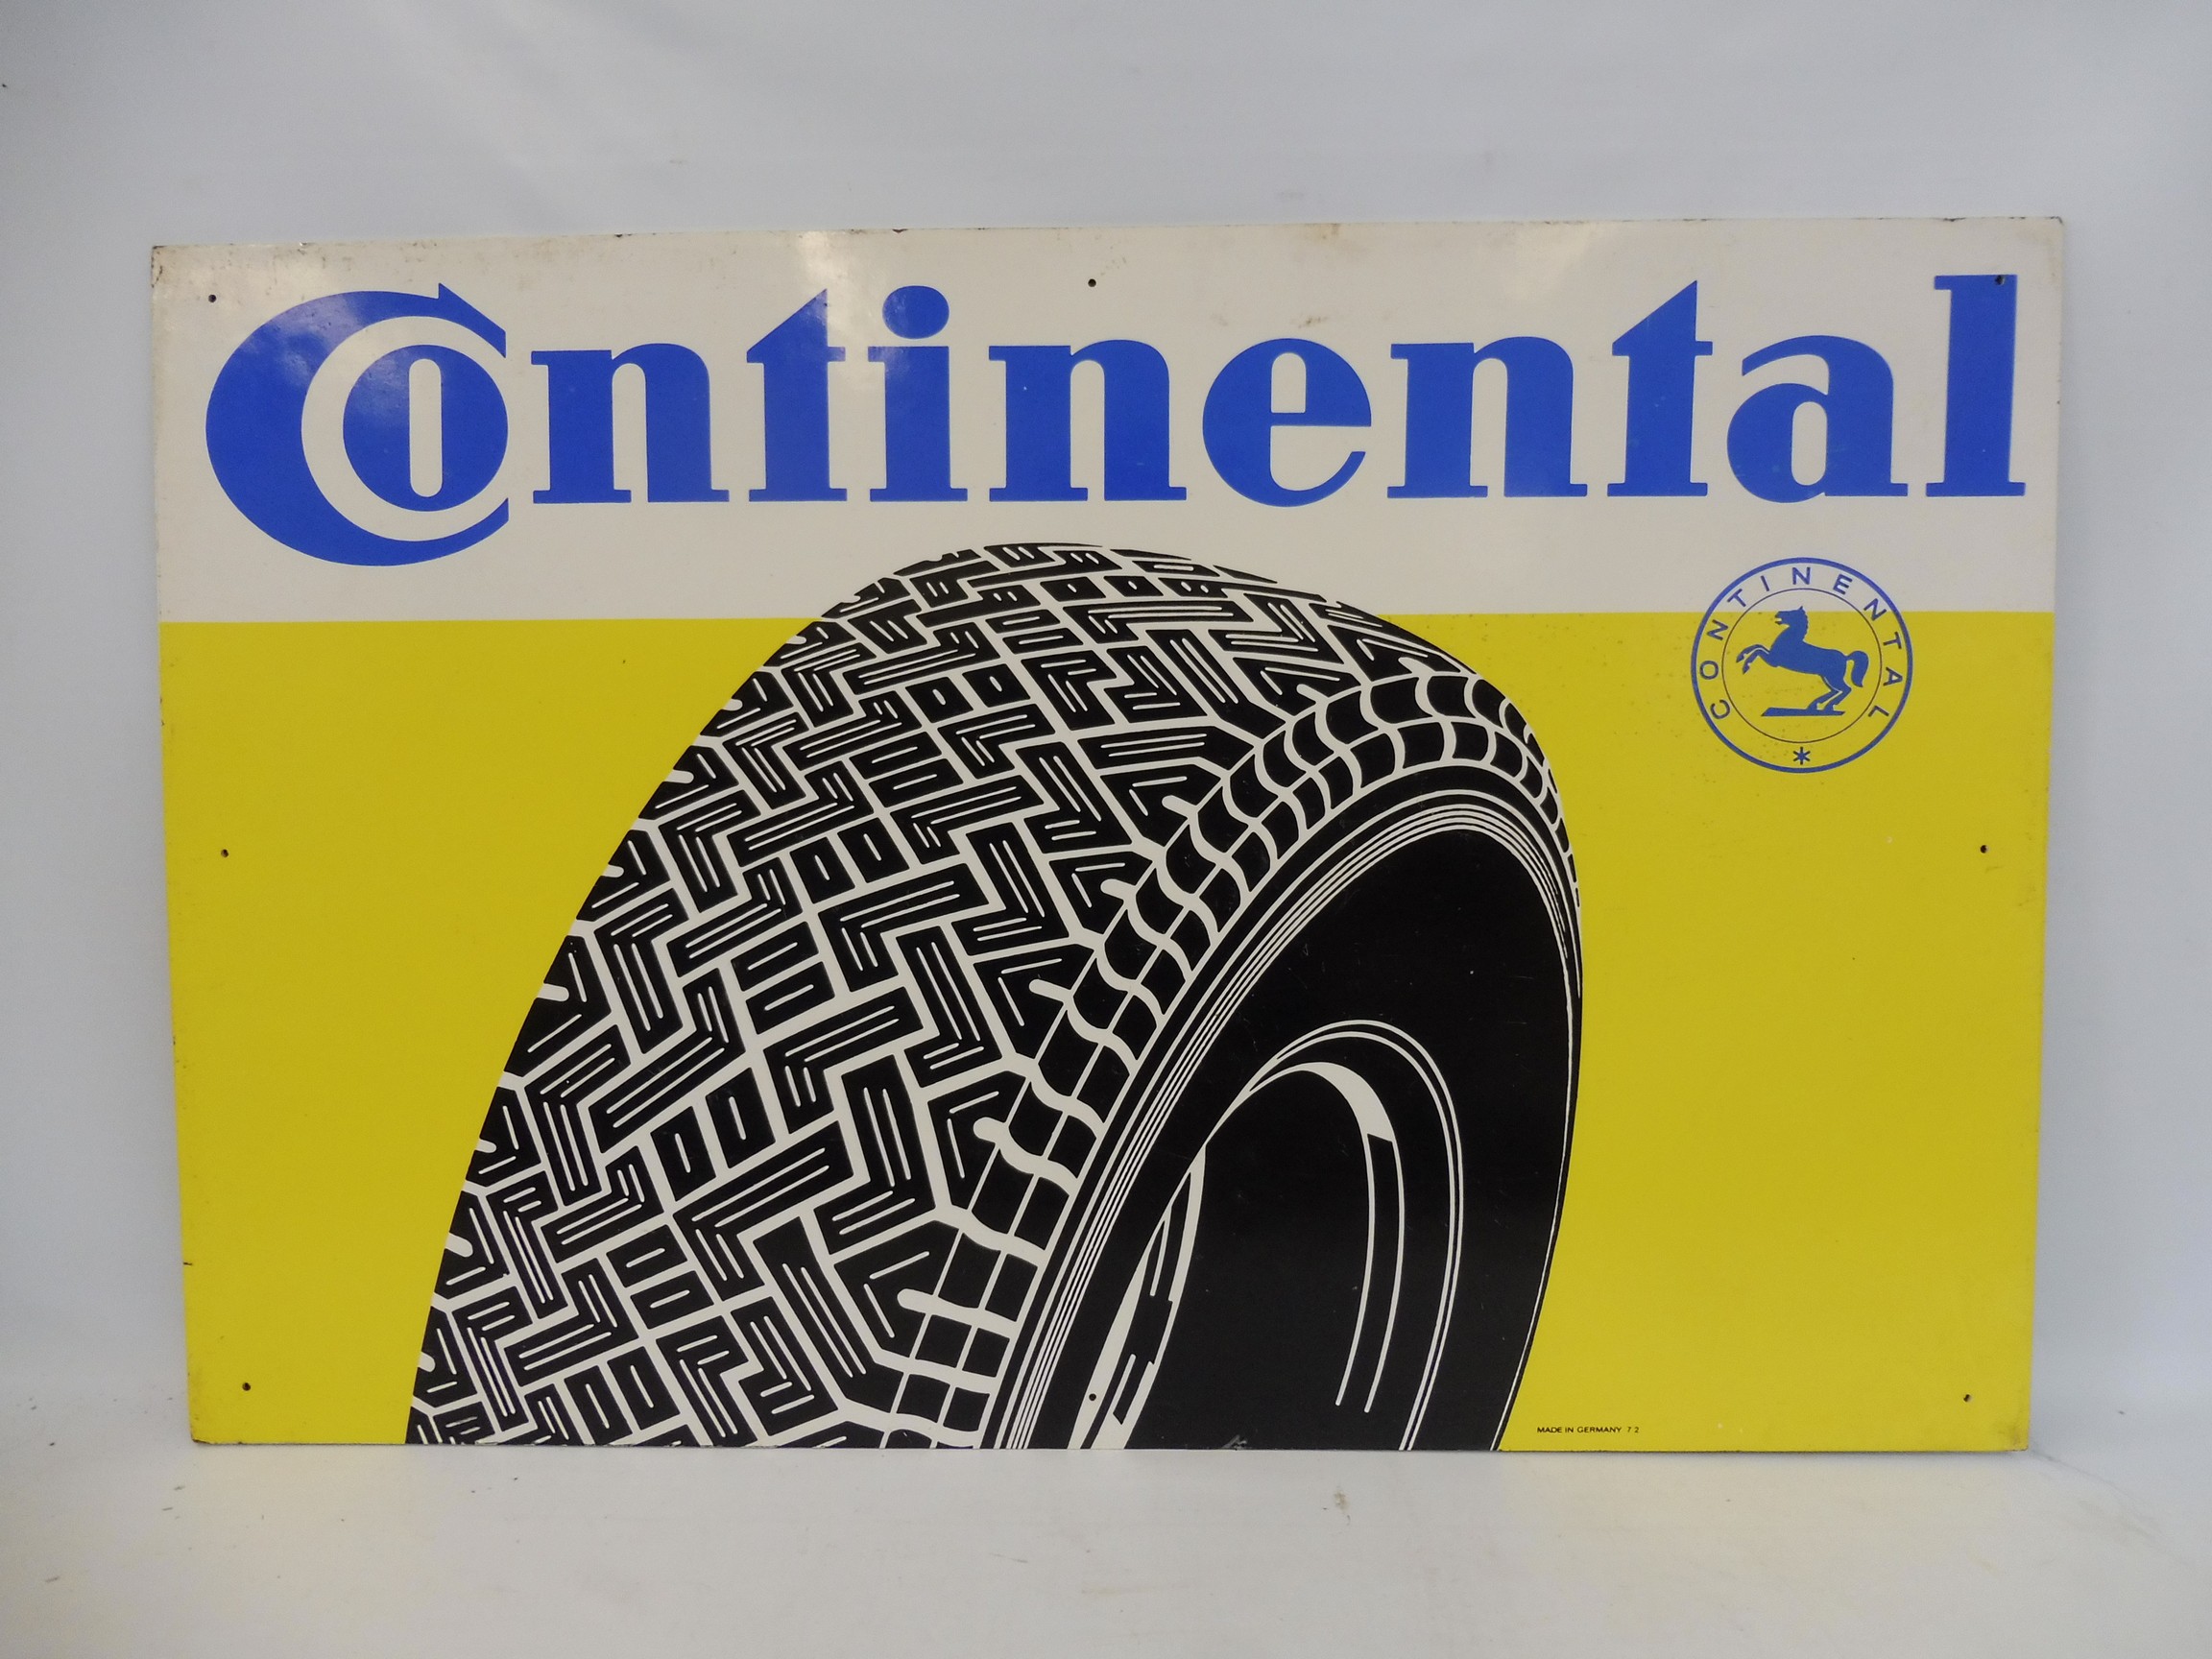 A large Continental hardboard advertising sign, 39 1/4 x 25 1/2".